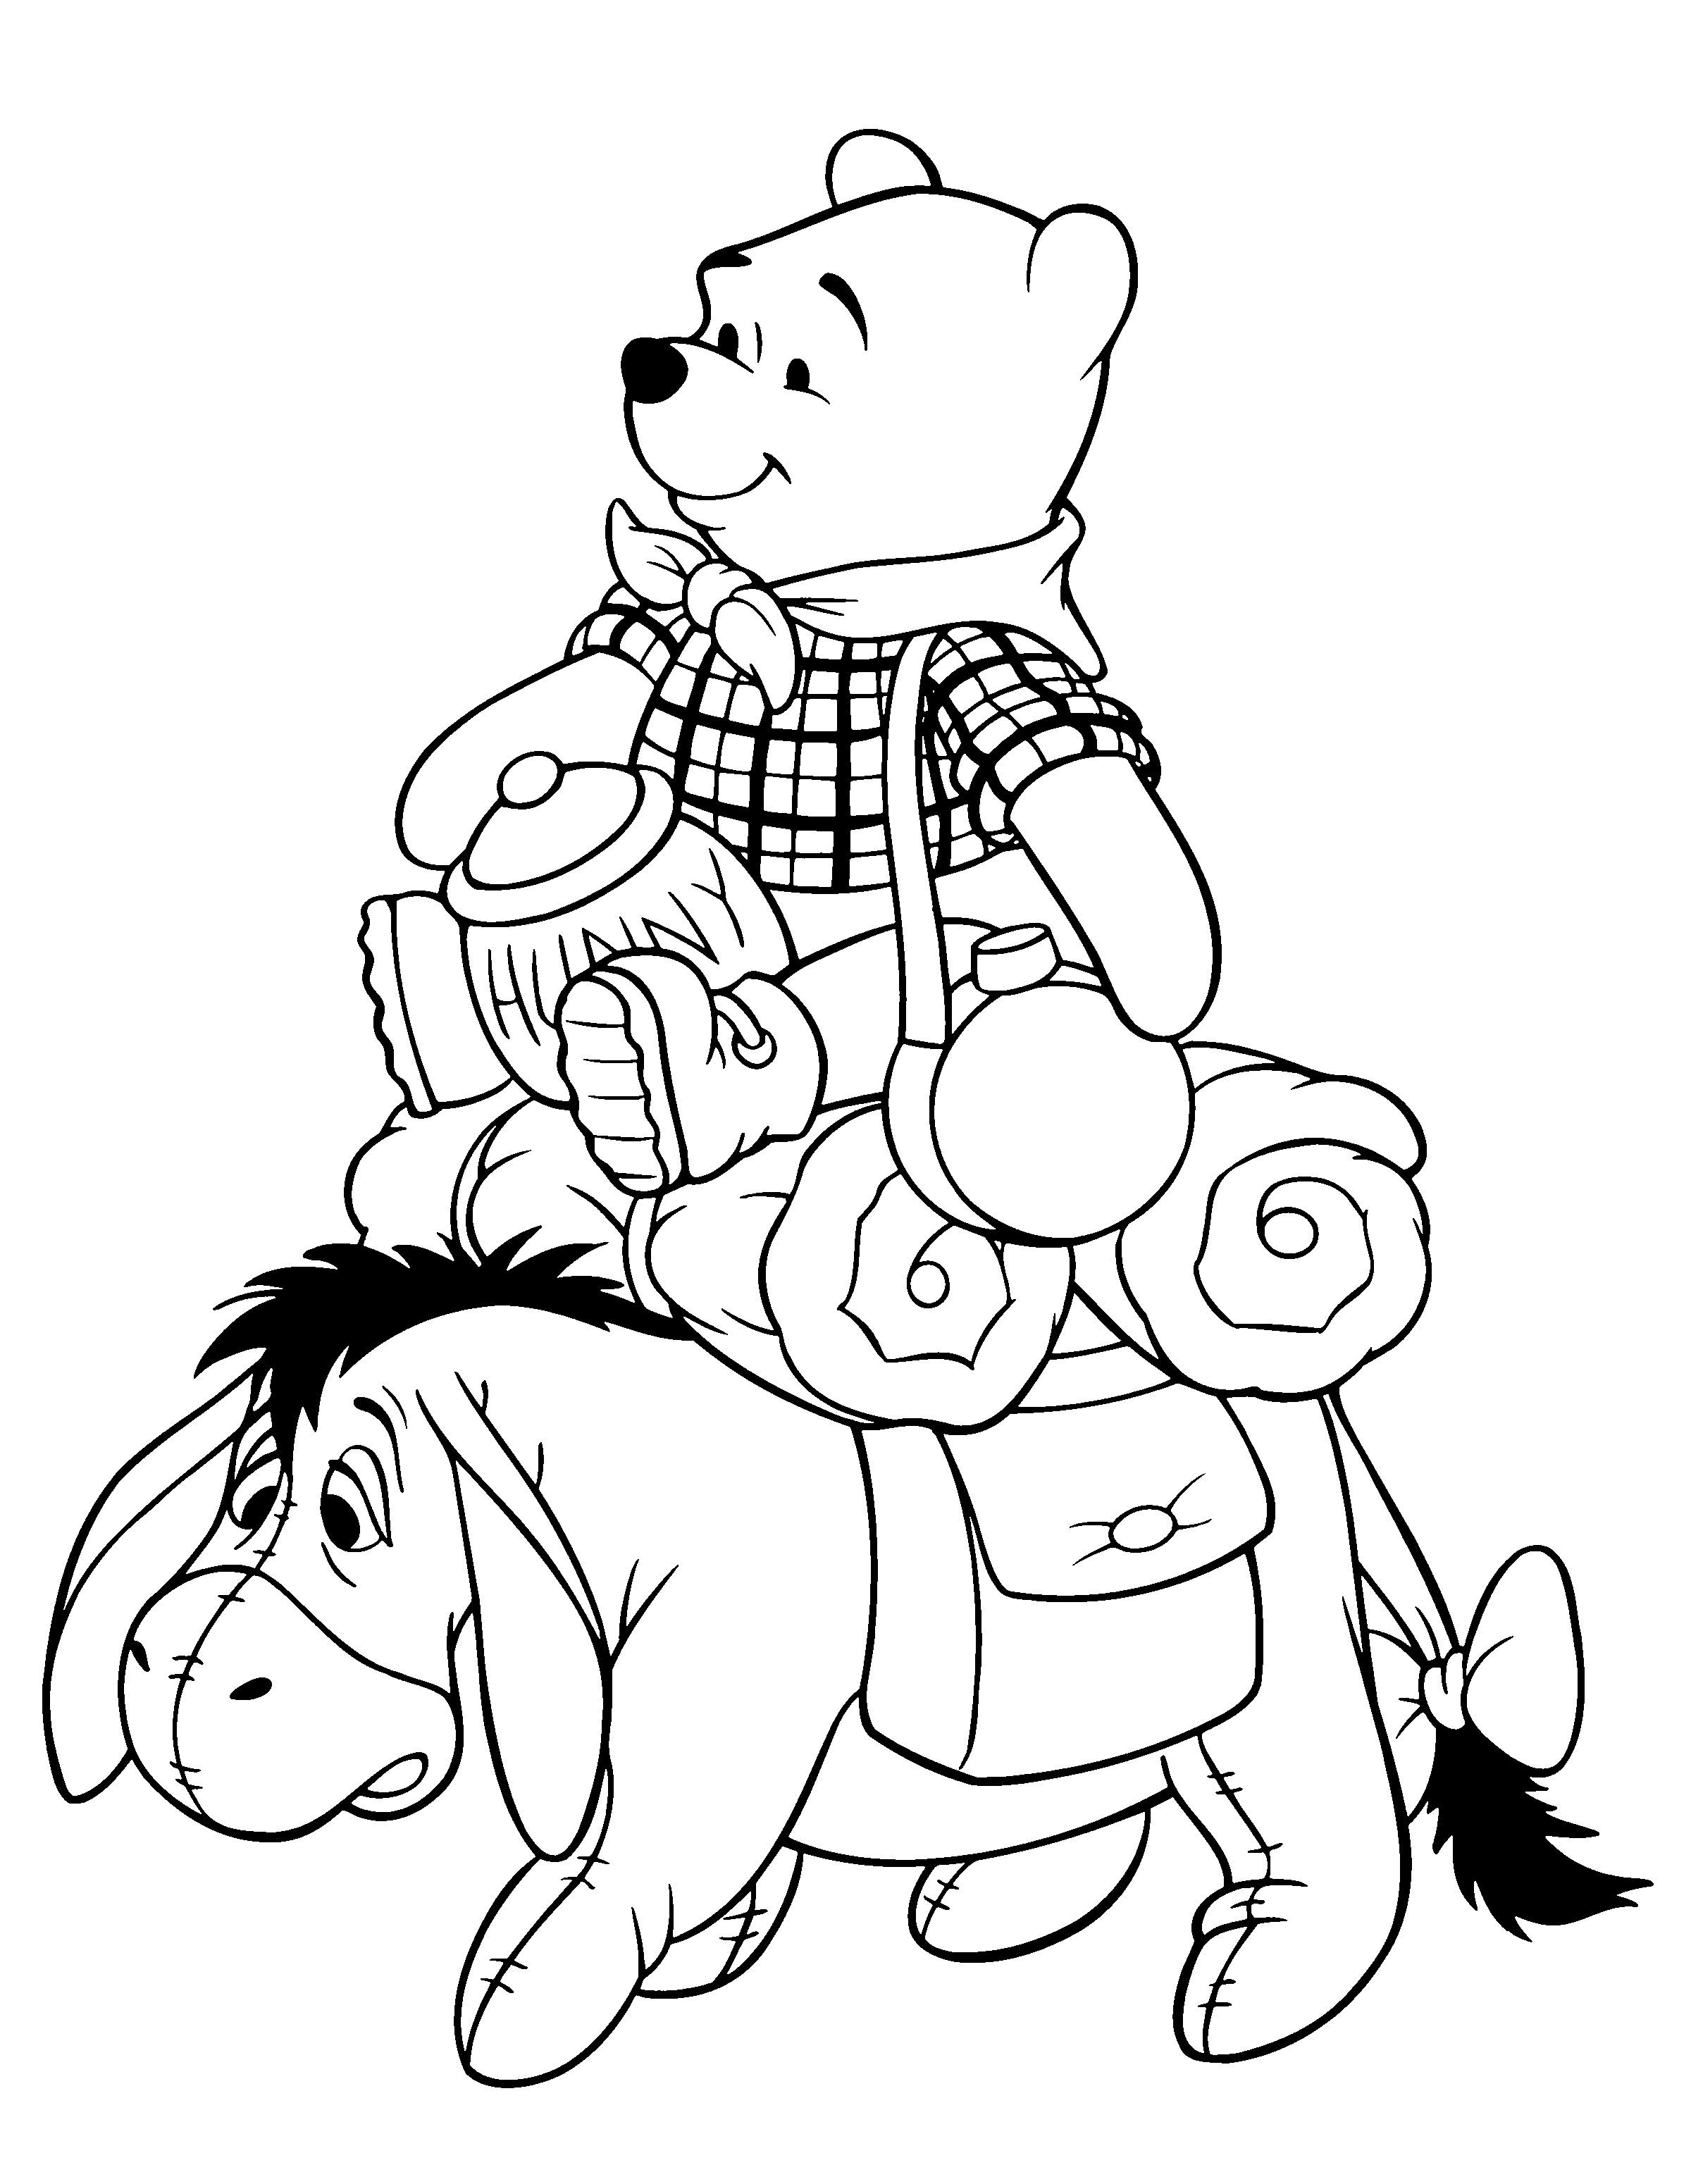 Pooh Travels With Eeyore Coloring Page